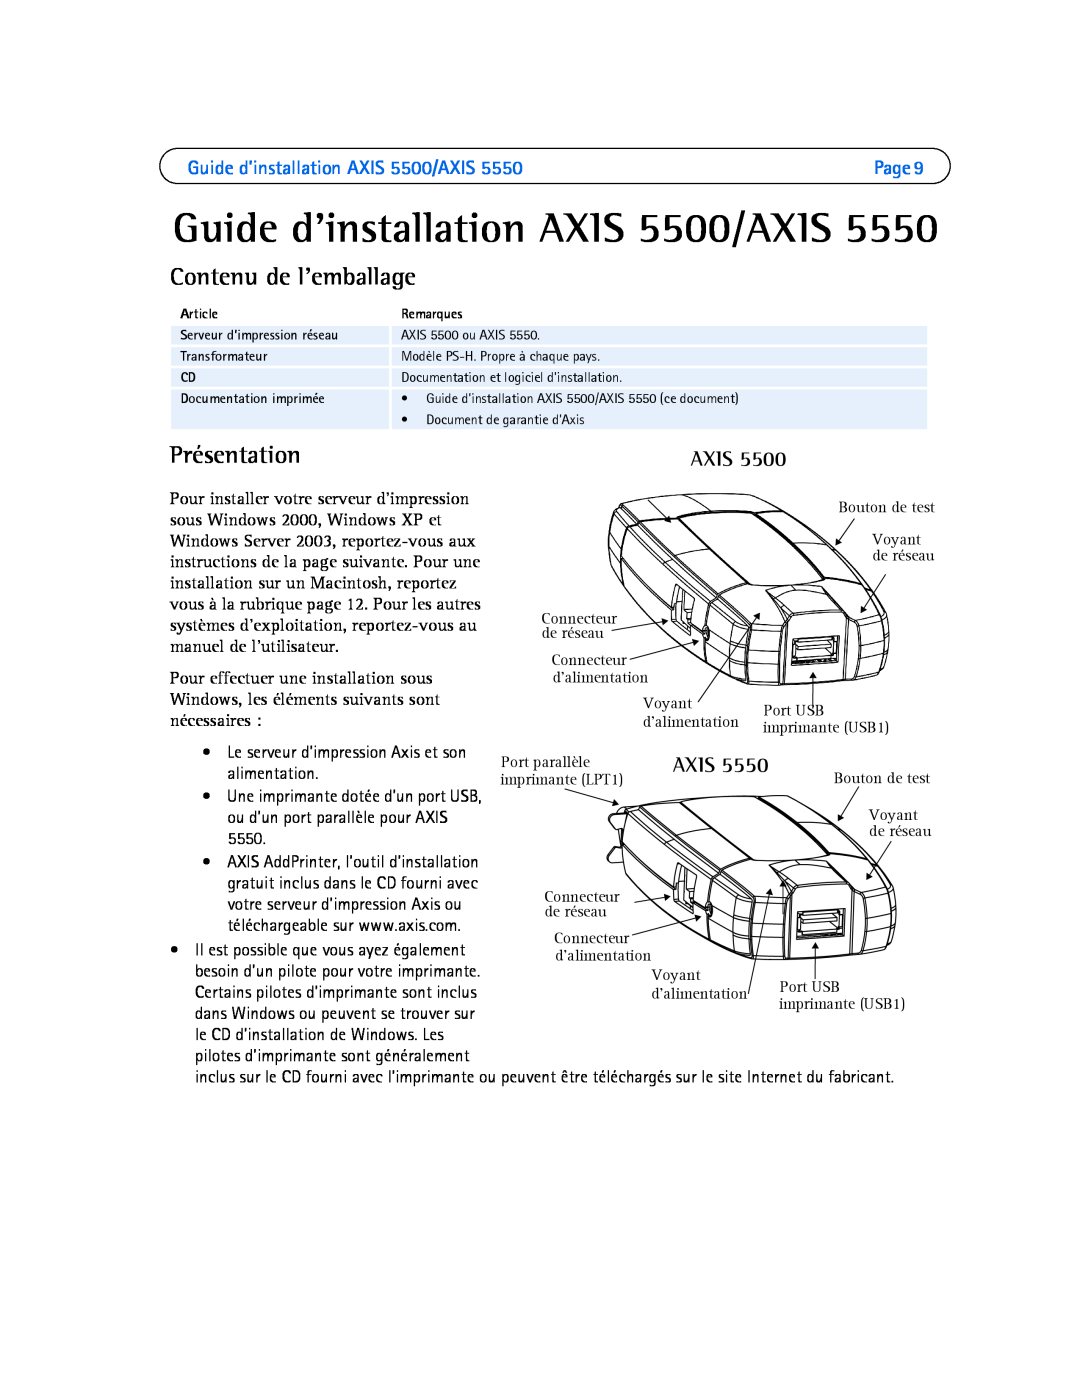 Axis Communications AXIS 5550 manual Guide d’installation AXIS 5500/AXIS, Contenu de l’emballage, Présentation, Axis 